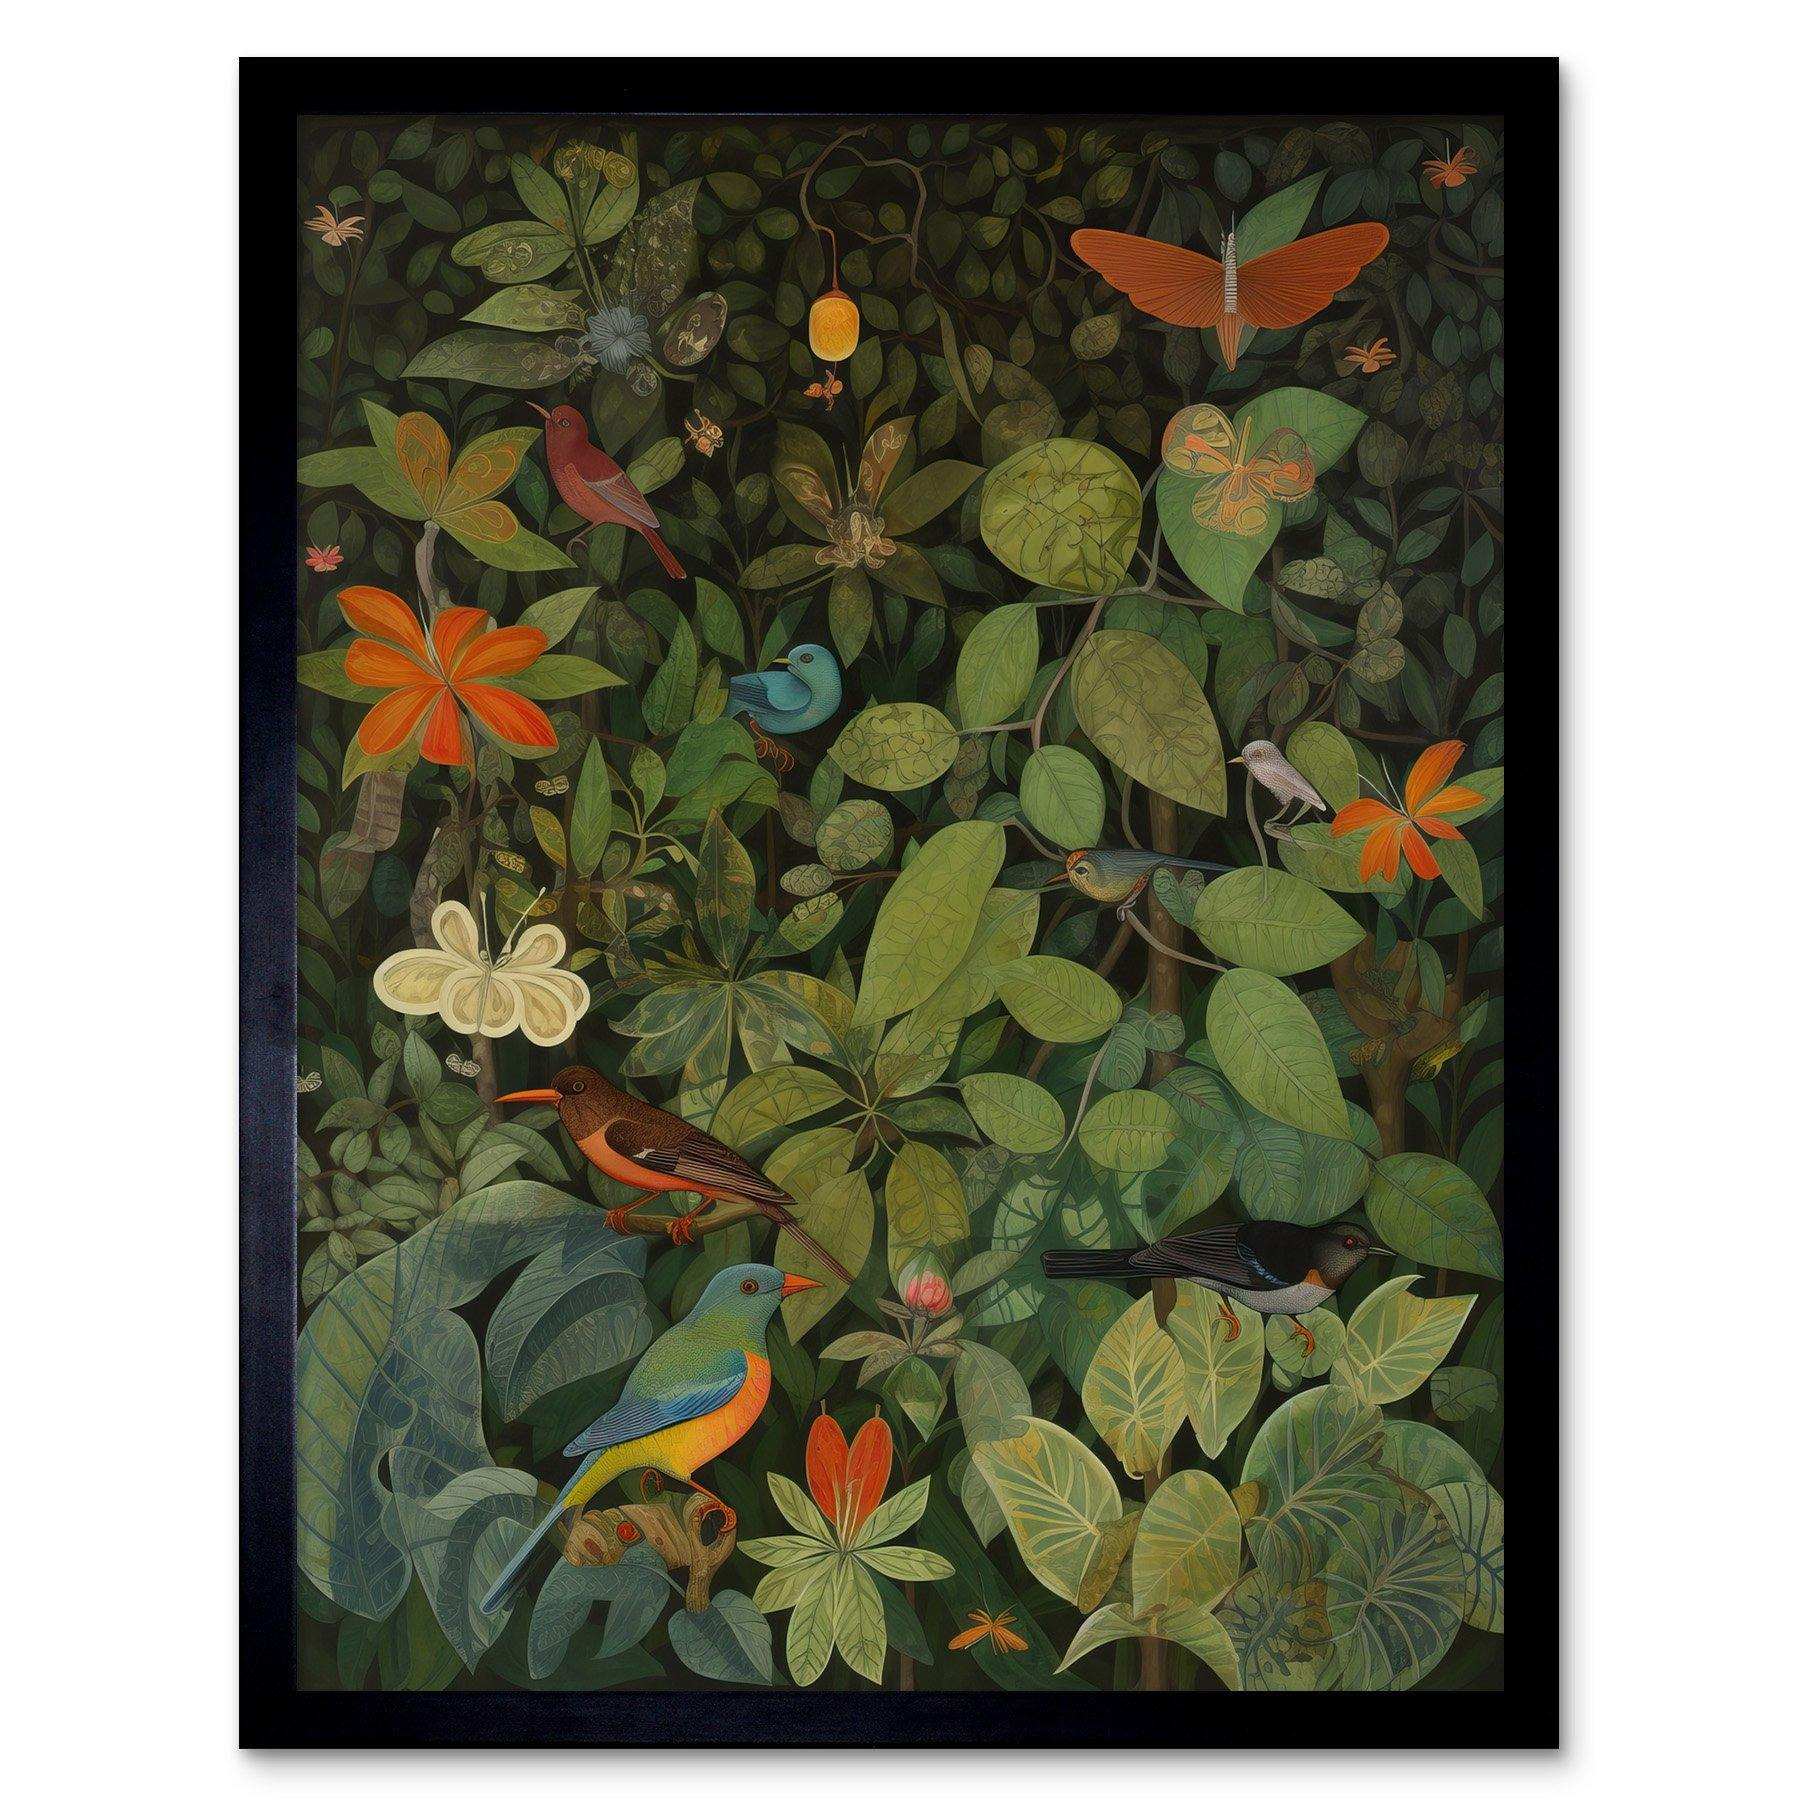 Wall Art Print Audubon Style Birds and Insects in Jungle Art Framed - image 1